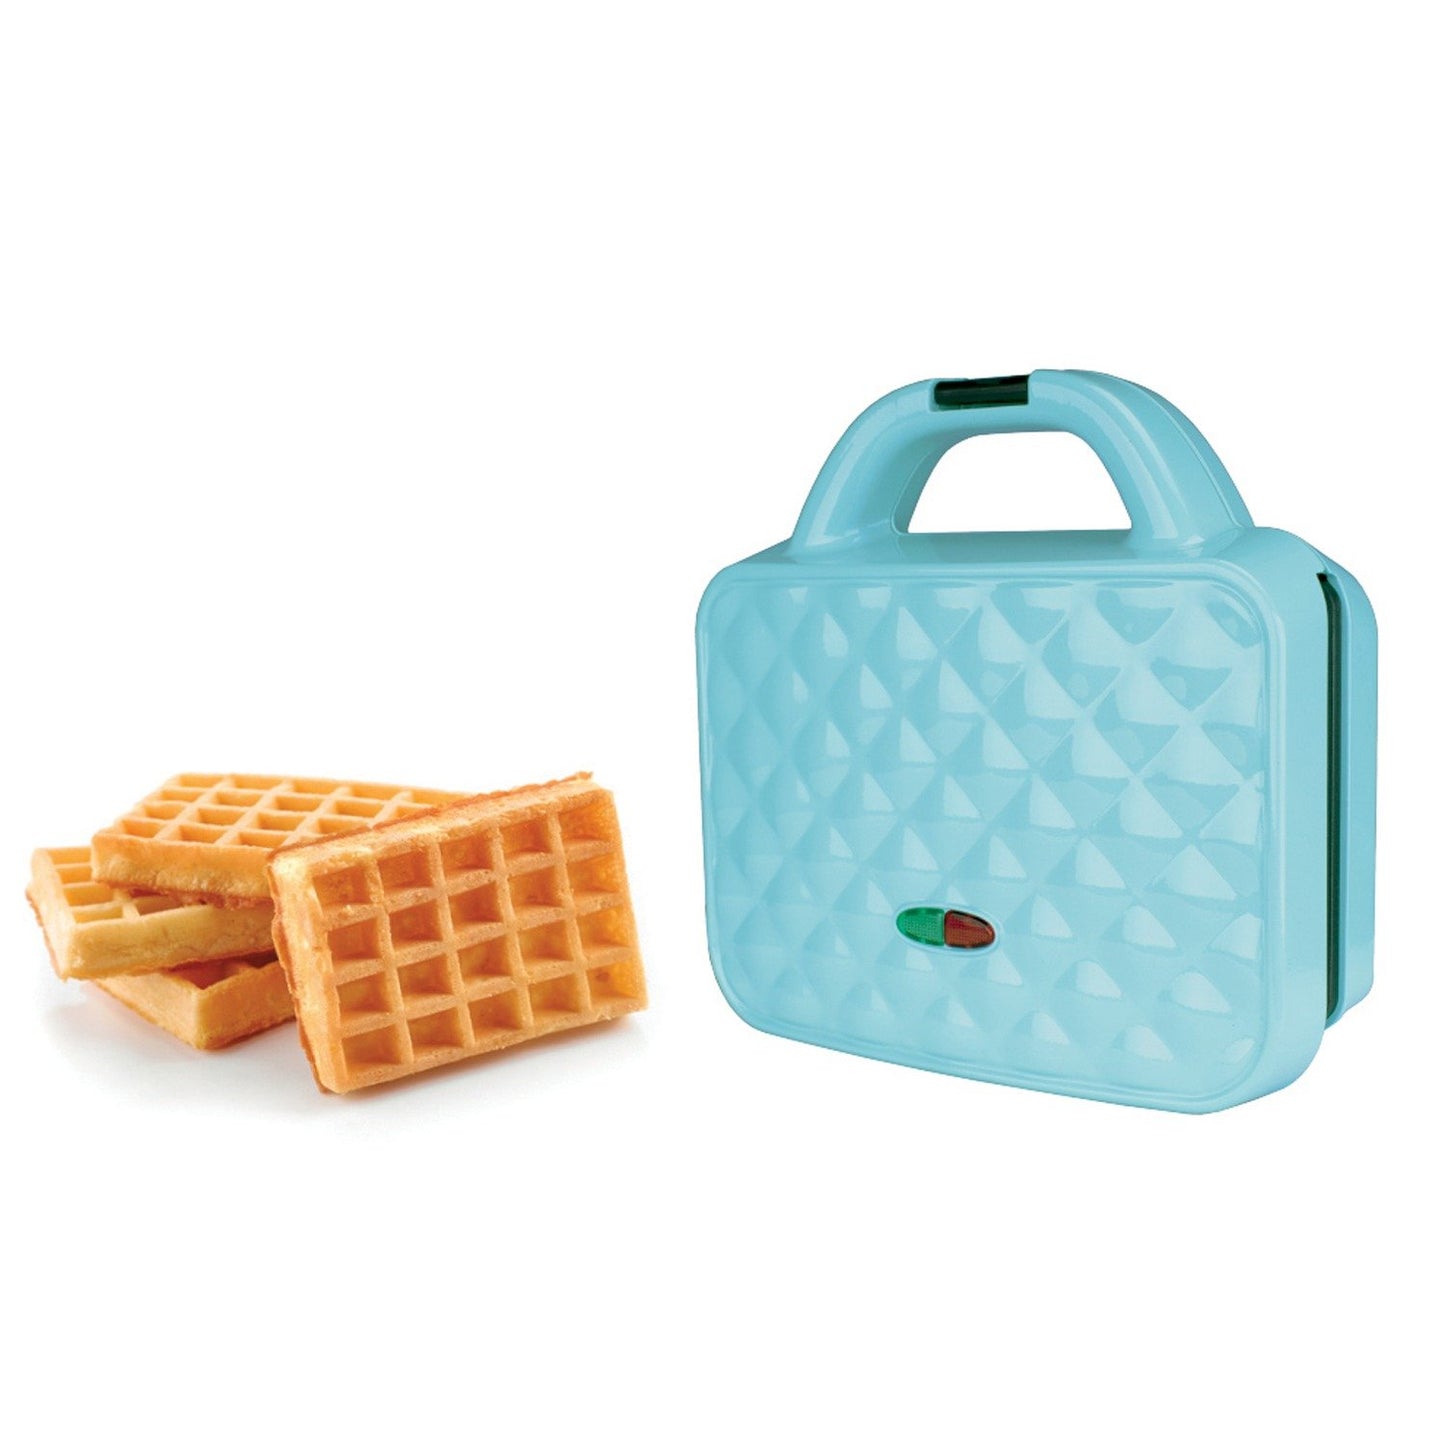 Brentwood Appl. TS-239BL Couture Purse Nonstick Dual Waffle Maker (Blue)